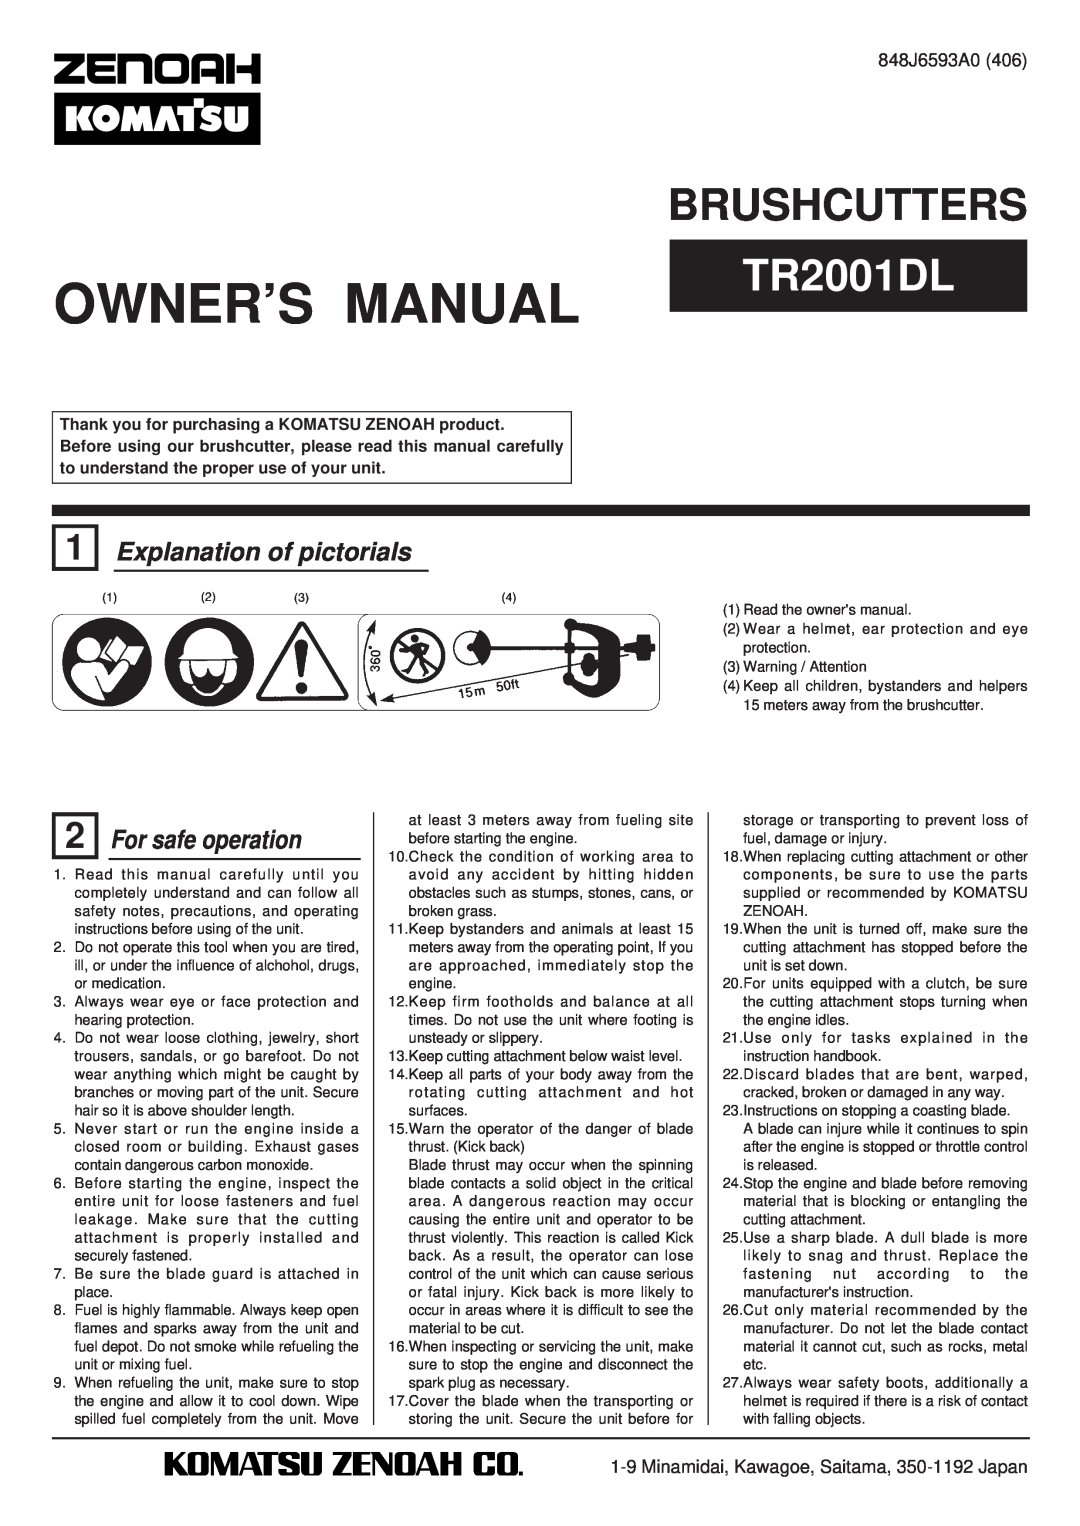 Zenoah TR2001DL owner manual Explanation of pictorials, For safe operation, Brushcutters, 848J6593A0 